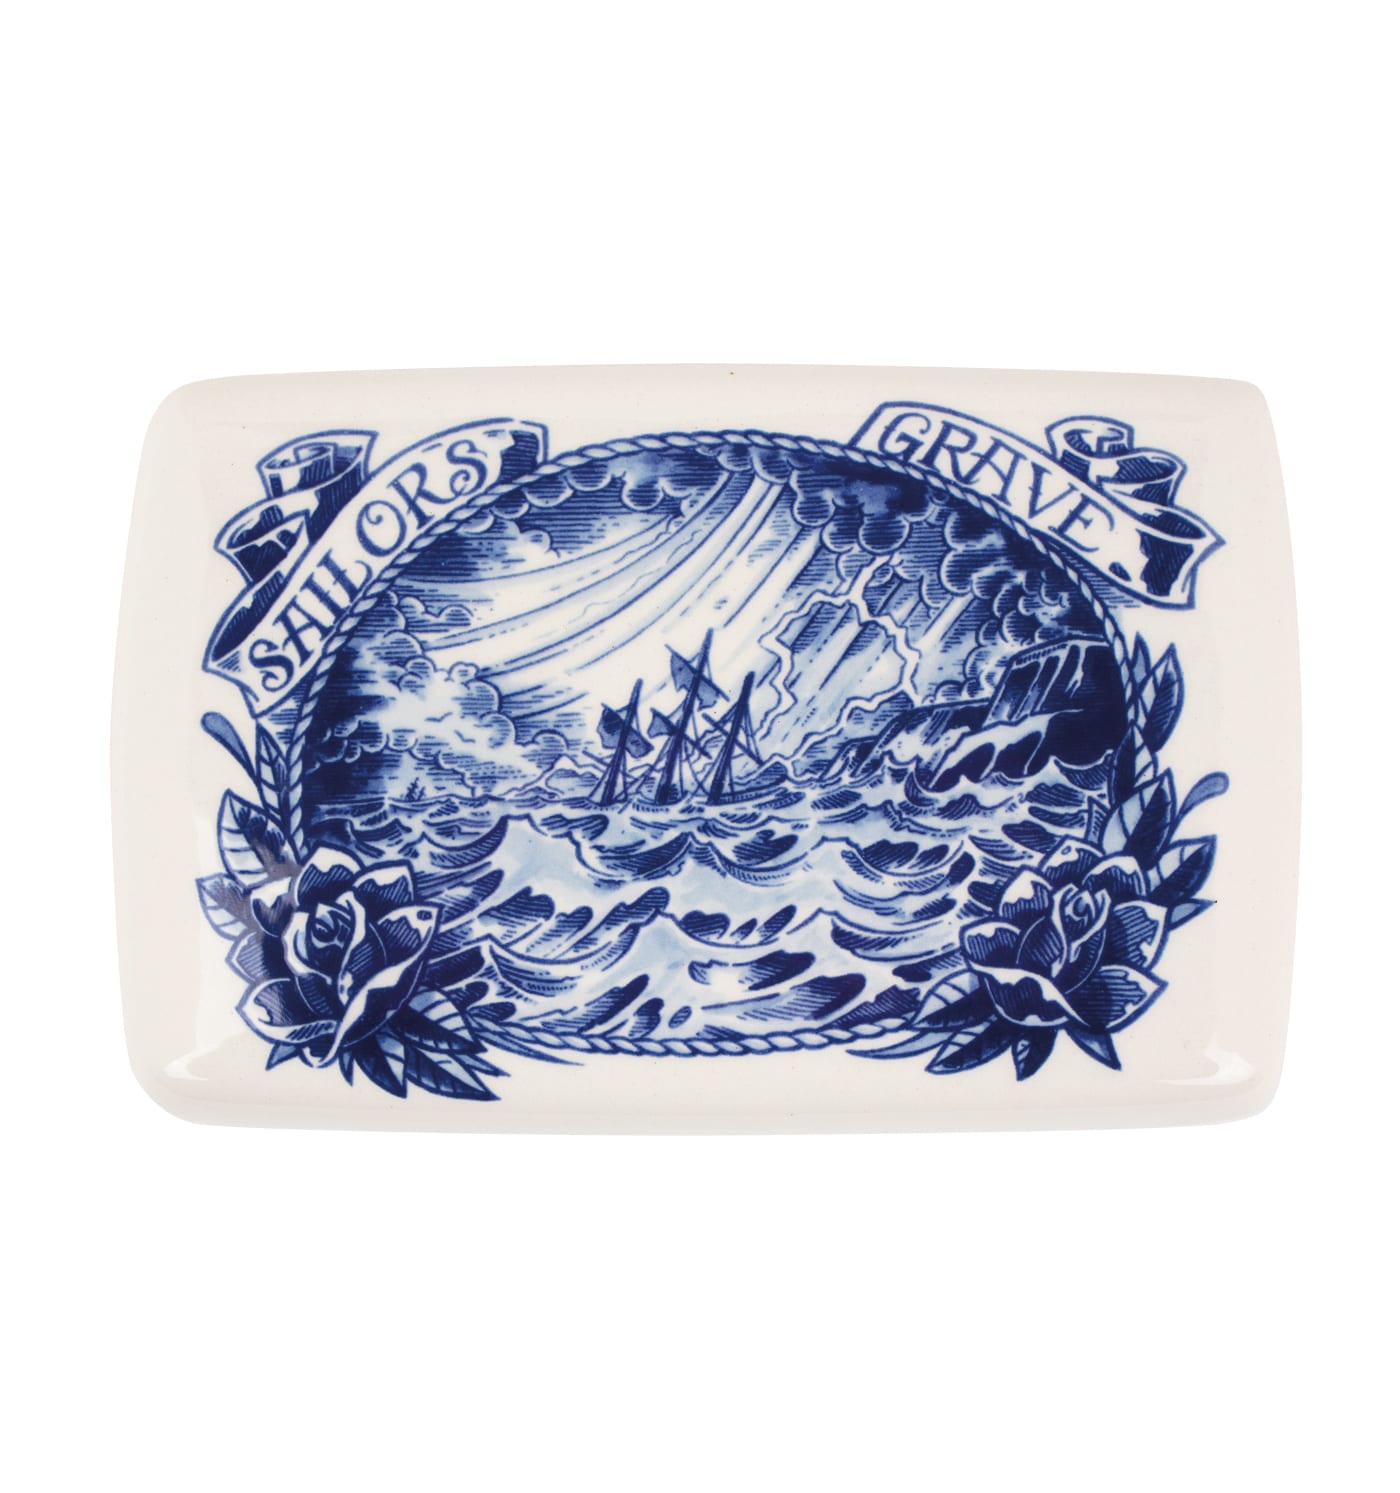 Table Box Sailor’s Grave by Royal Delft